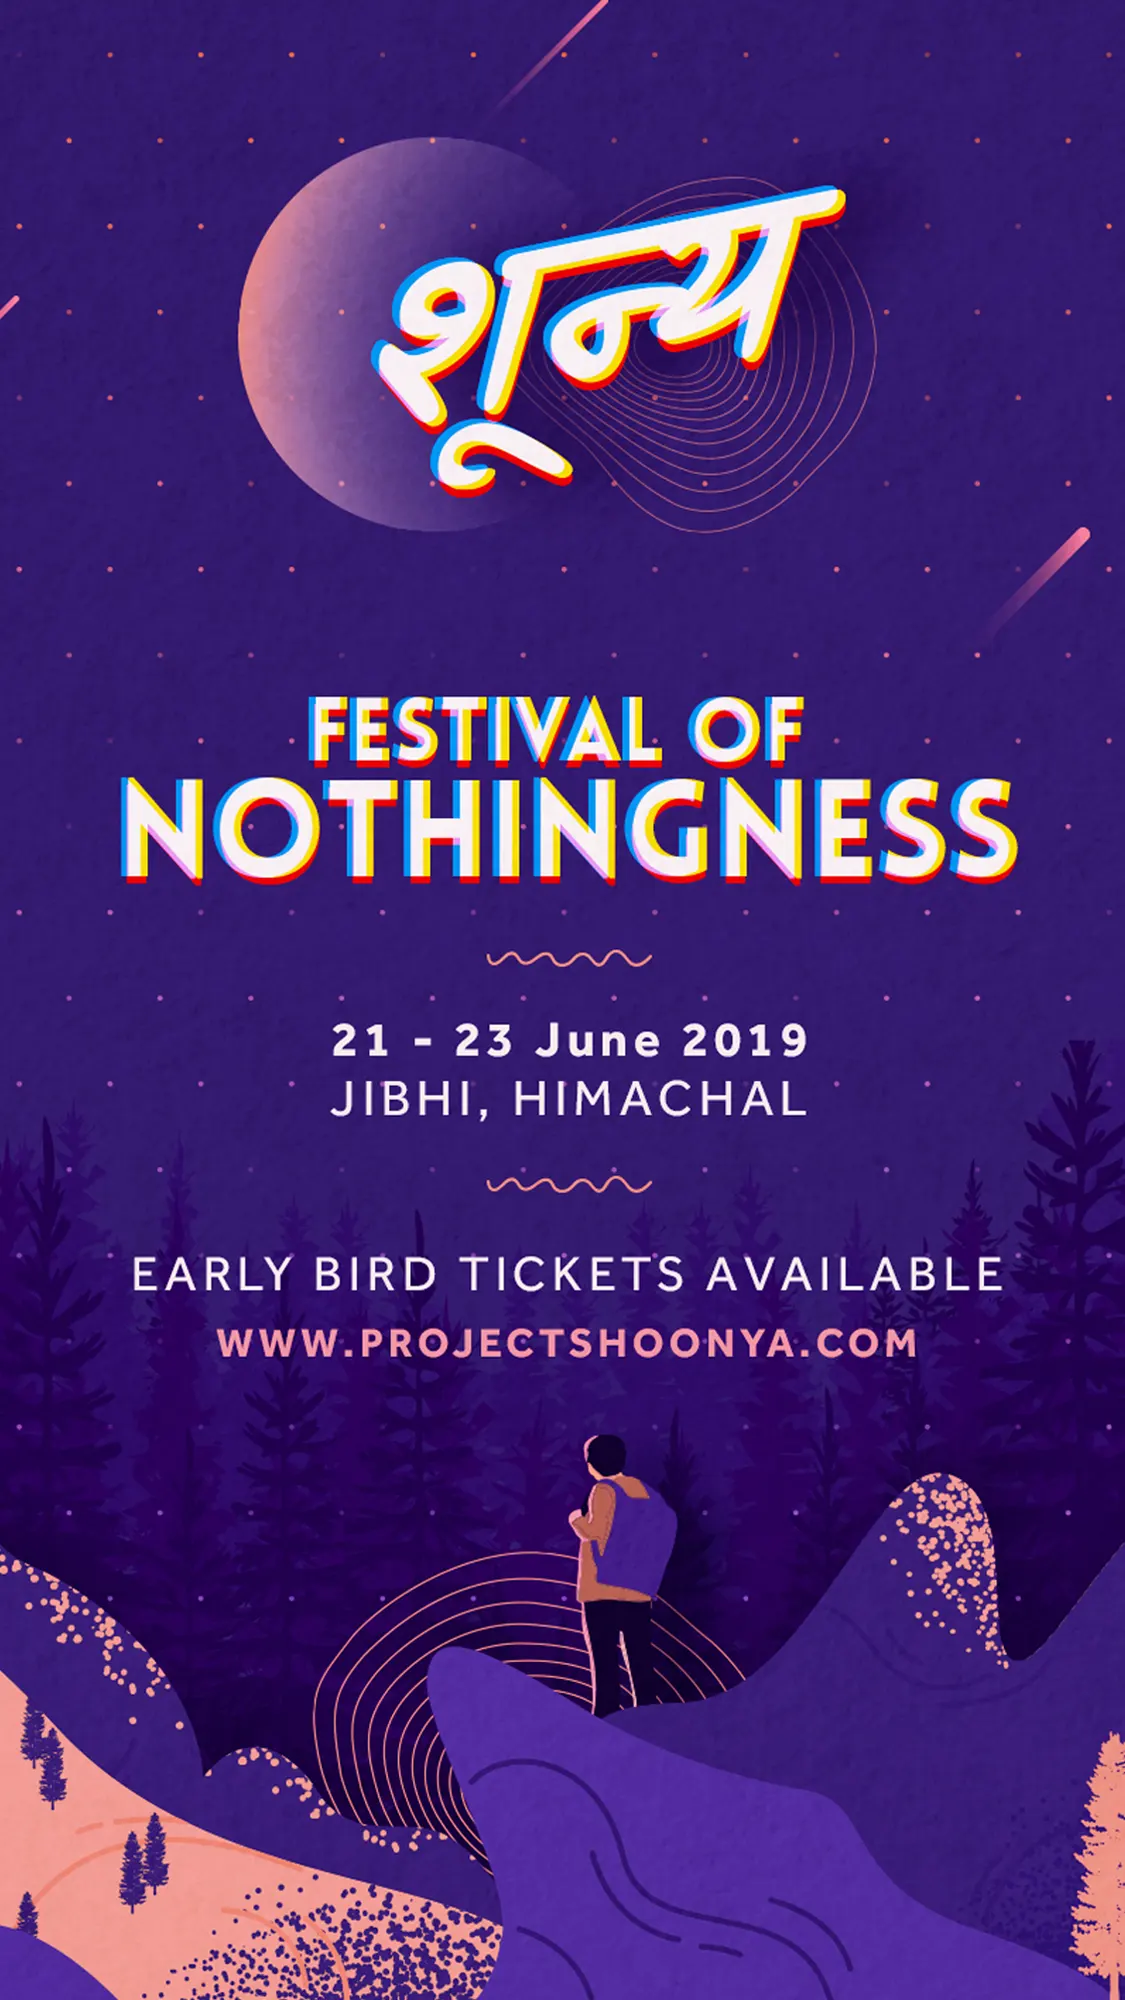 Join us at Shoonya for the Festival of Nothingness 2019!